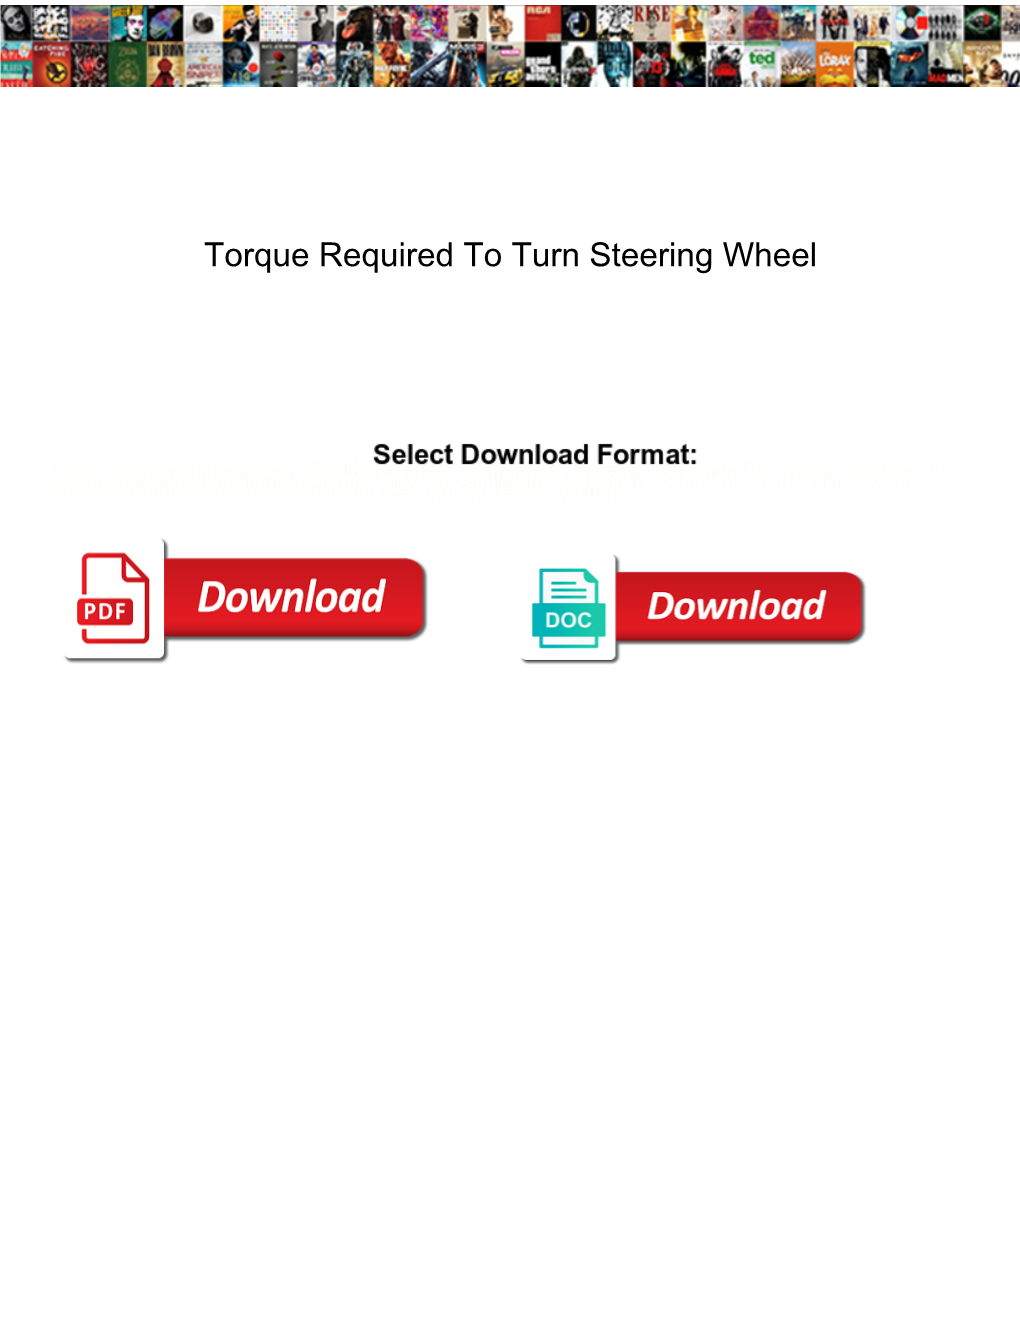 Torque Required to Turn Steering Wheel